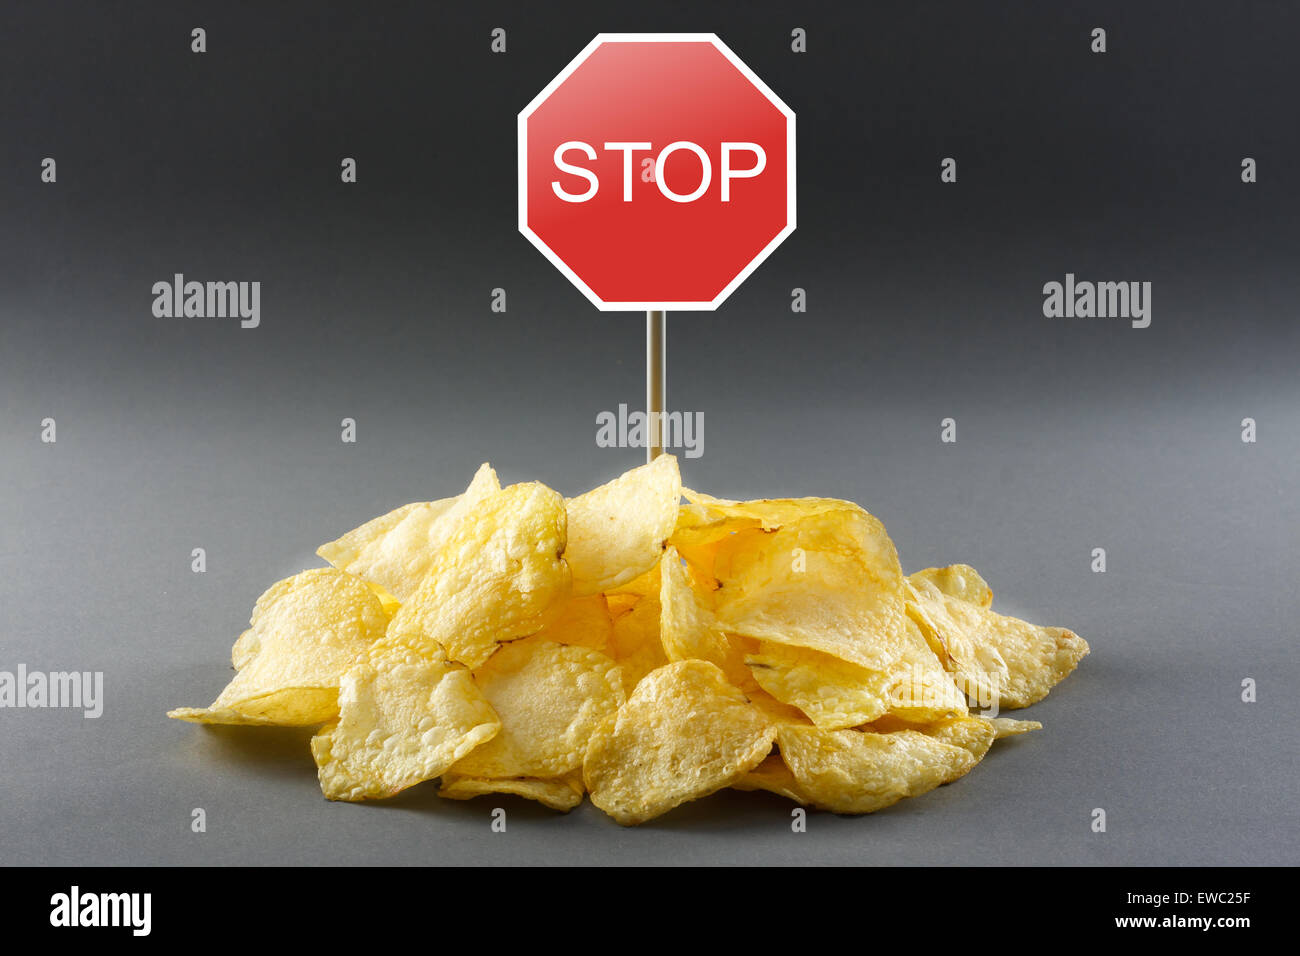 Junk food concept - potato chips and road stop sign Stock Photo